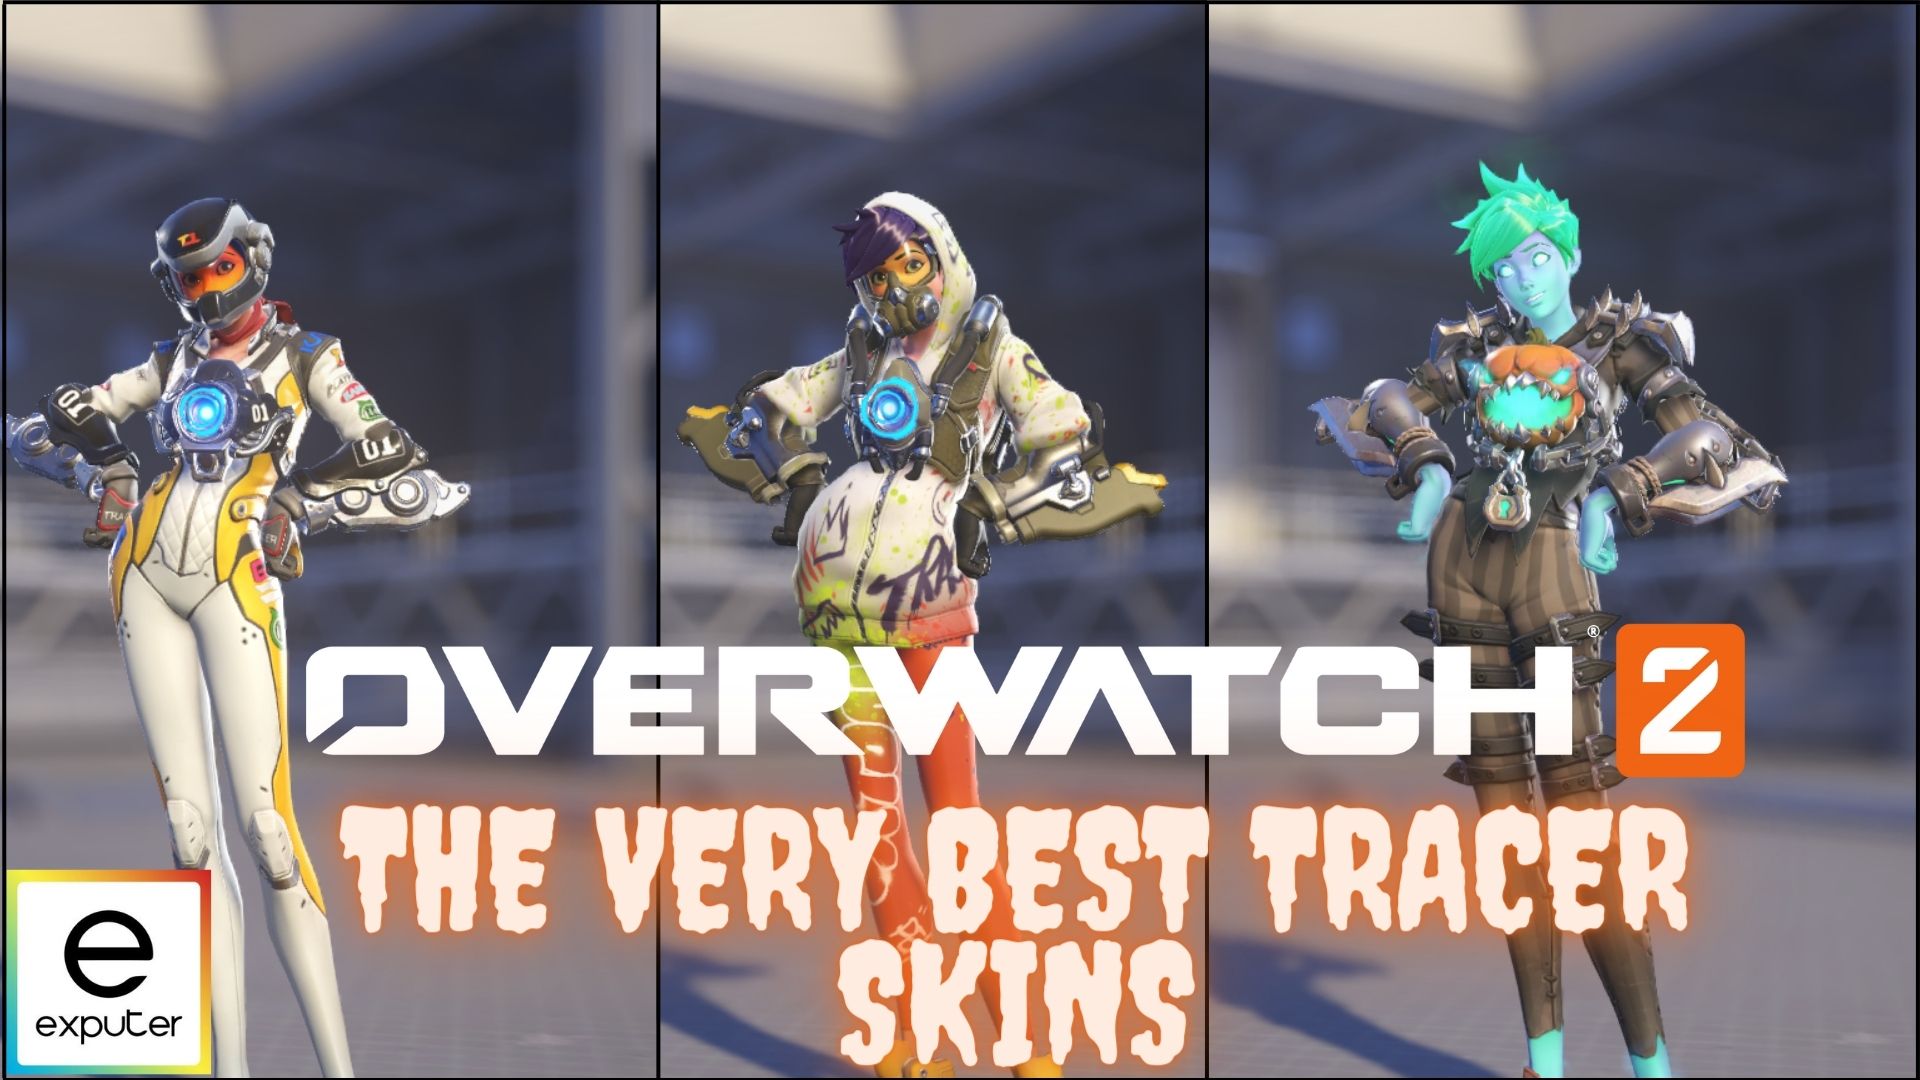 How to unlock rare Overwatch League Tracer skins during Grand